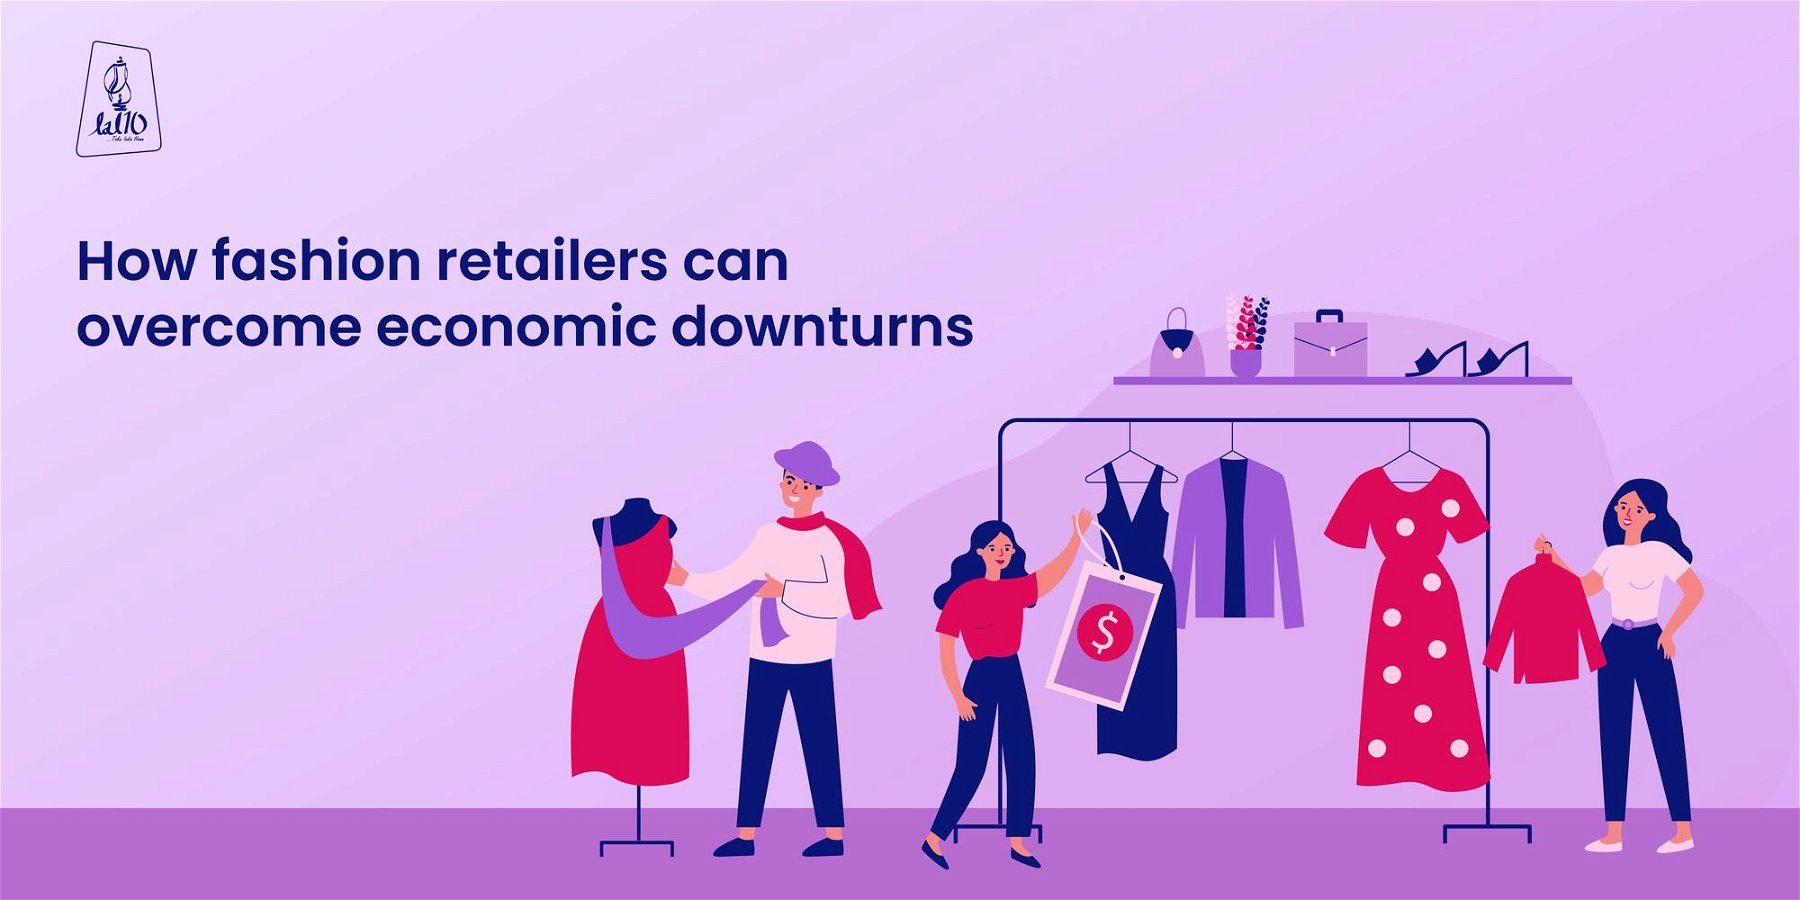 How fashion retailers can overcome economic downturns